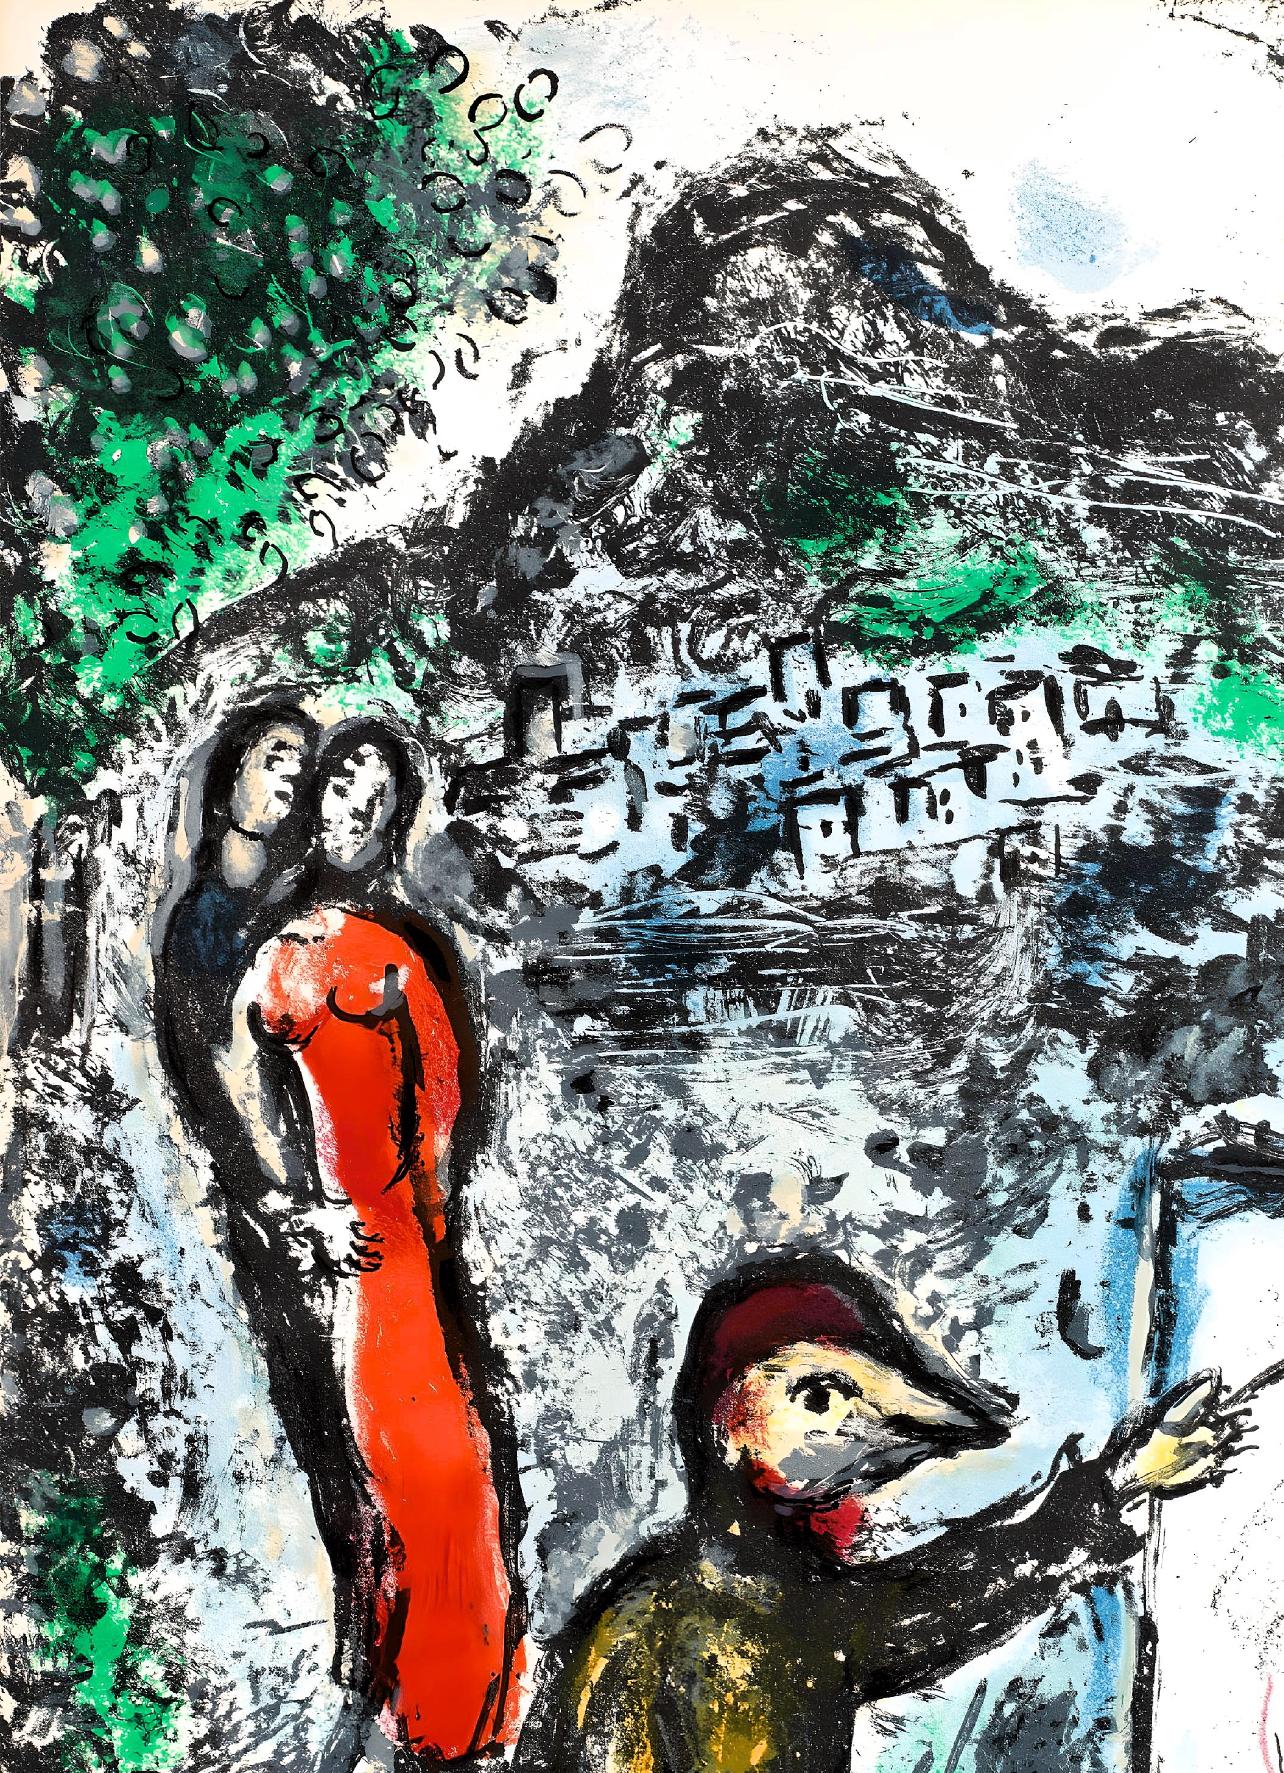 Original Edition Lithograph on wove paper. Inscription: unsigned and unnumbered, as issued. Excellent Condition; never framed or matted. Notes: Extracted from the volume, The Ceramics and Sculptures of Chagall, 1972. Published by Editions André